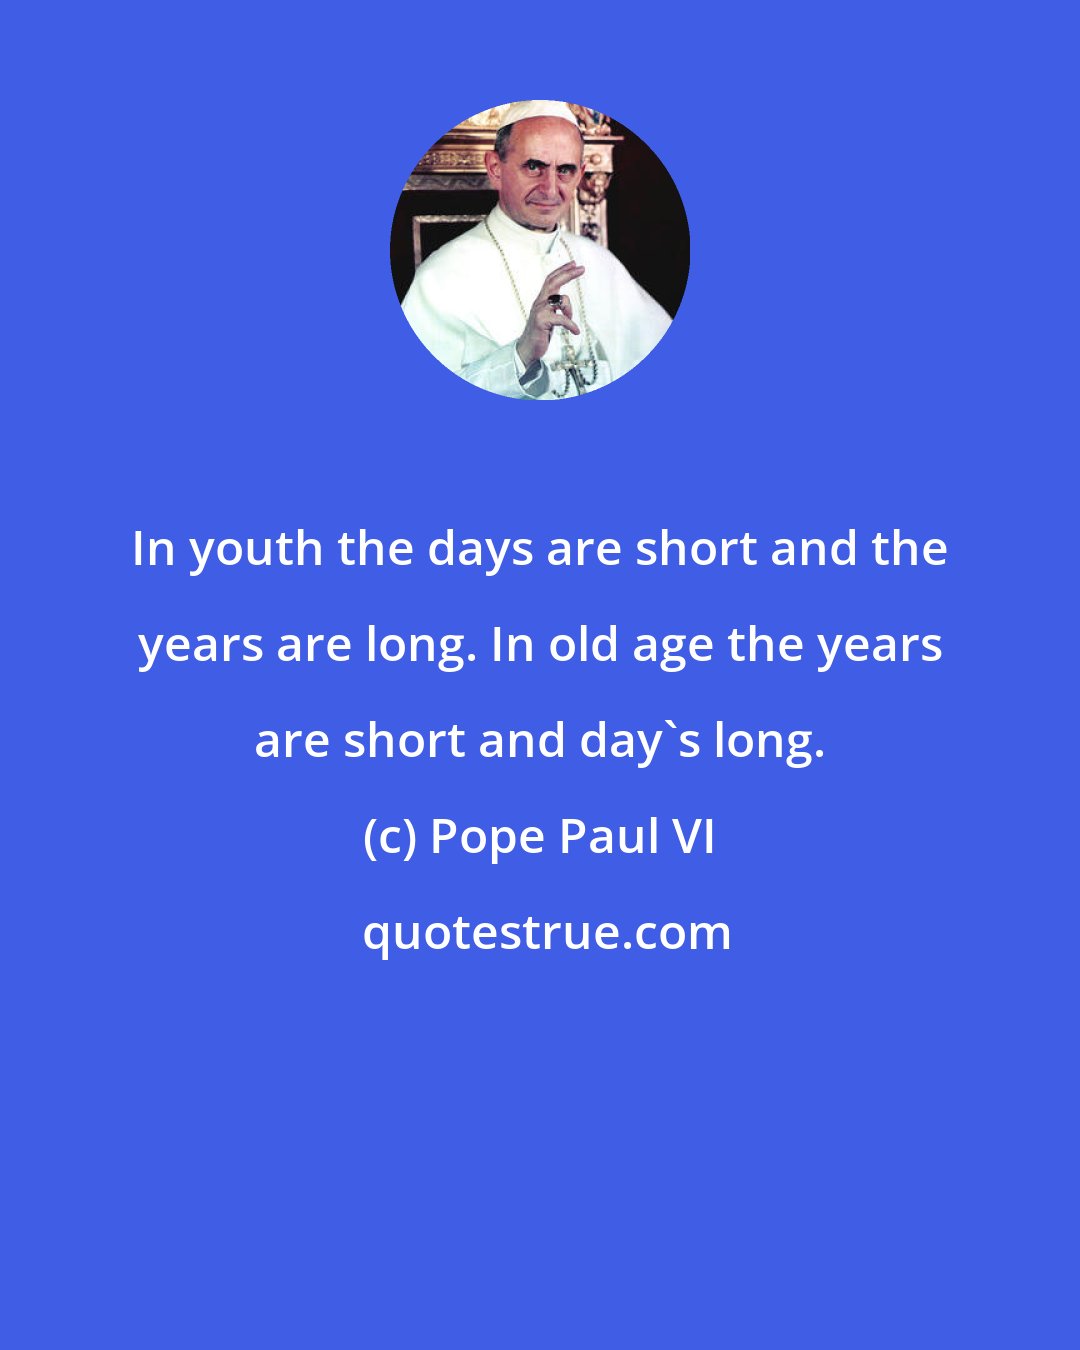 Pope Paul VI: In youth the days are short and the years are long. In old age the years are short and day's long.